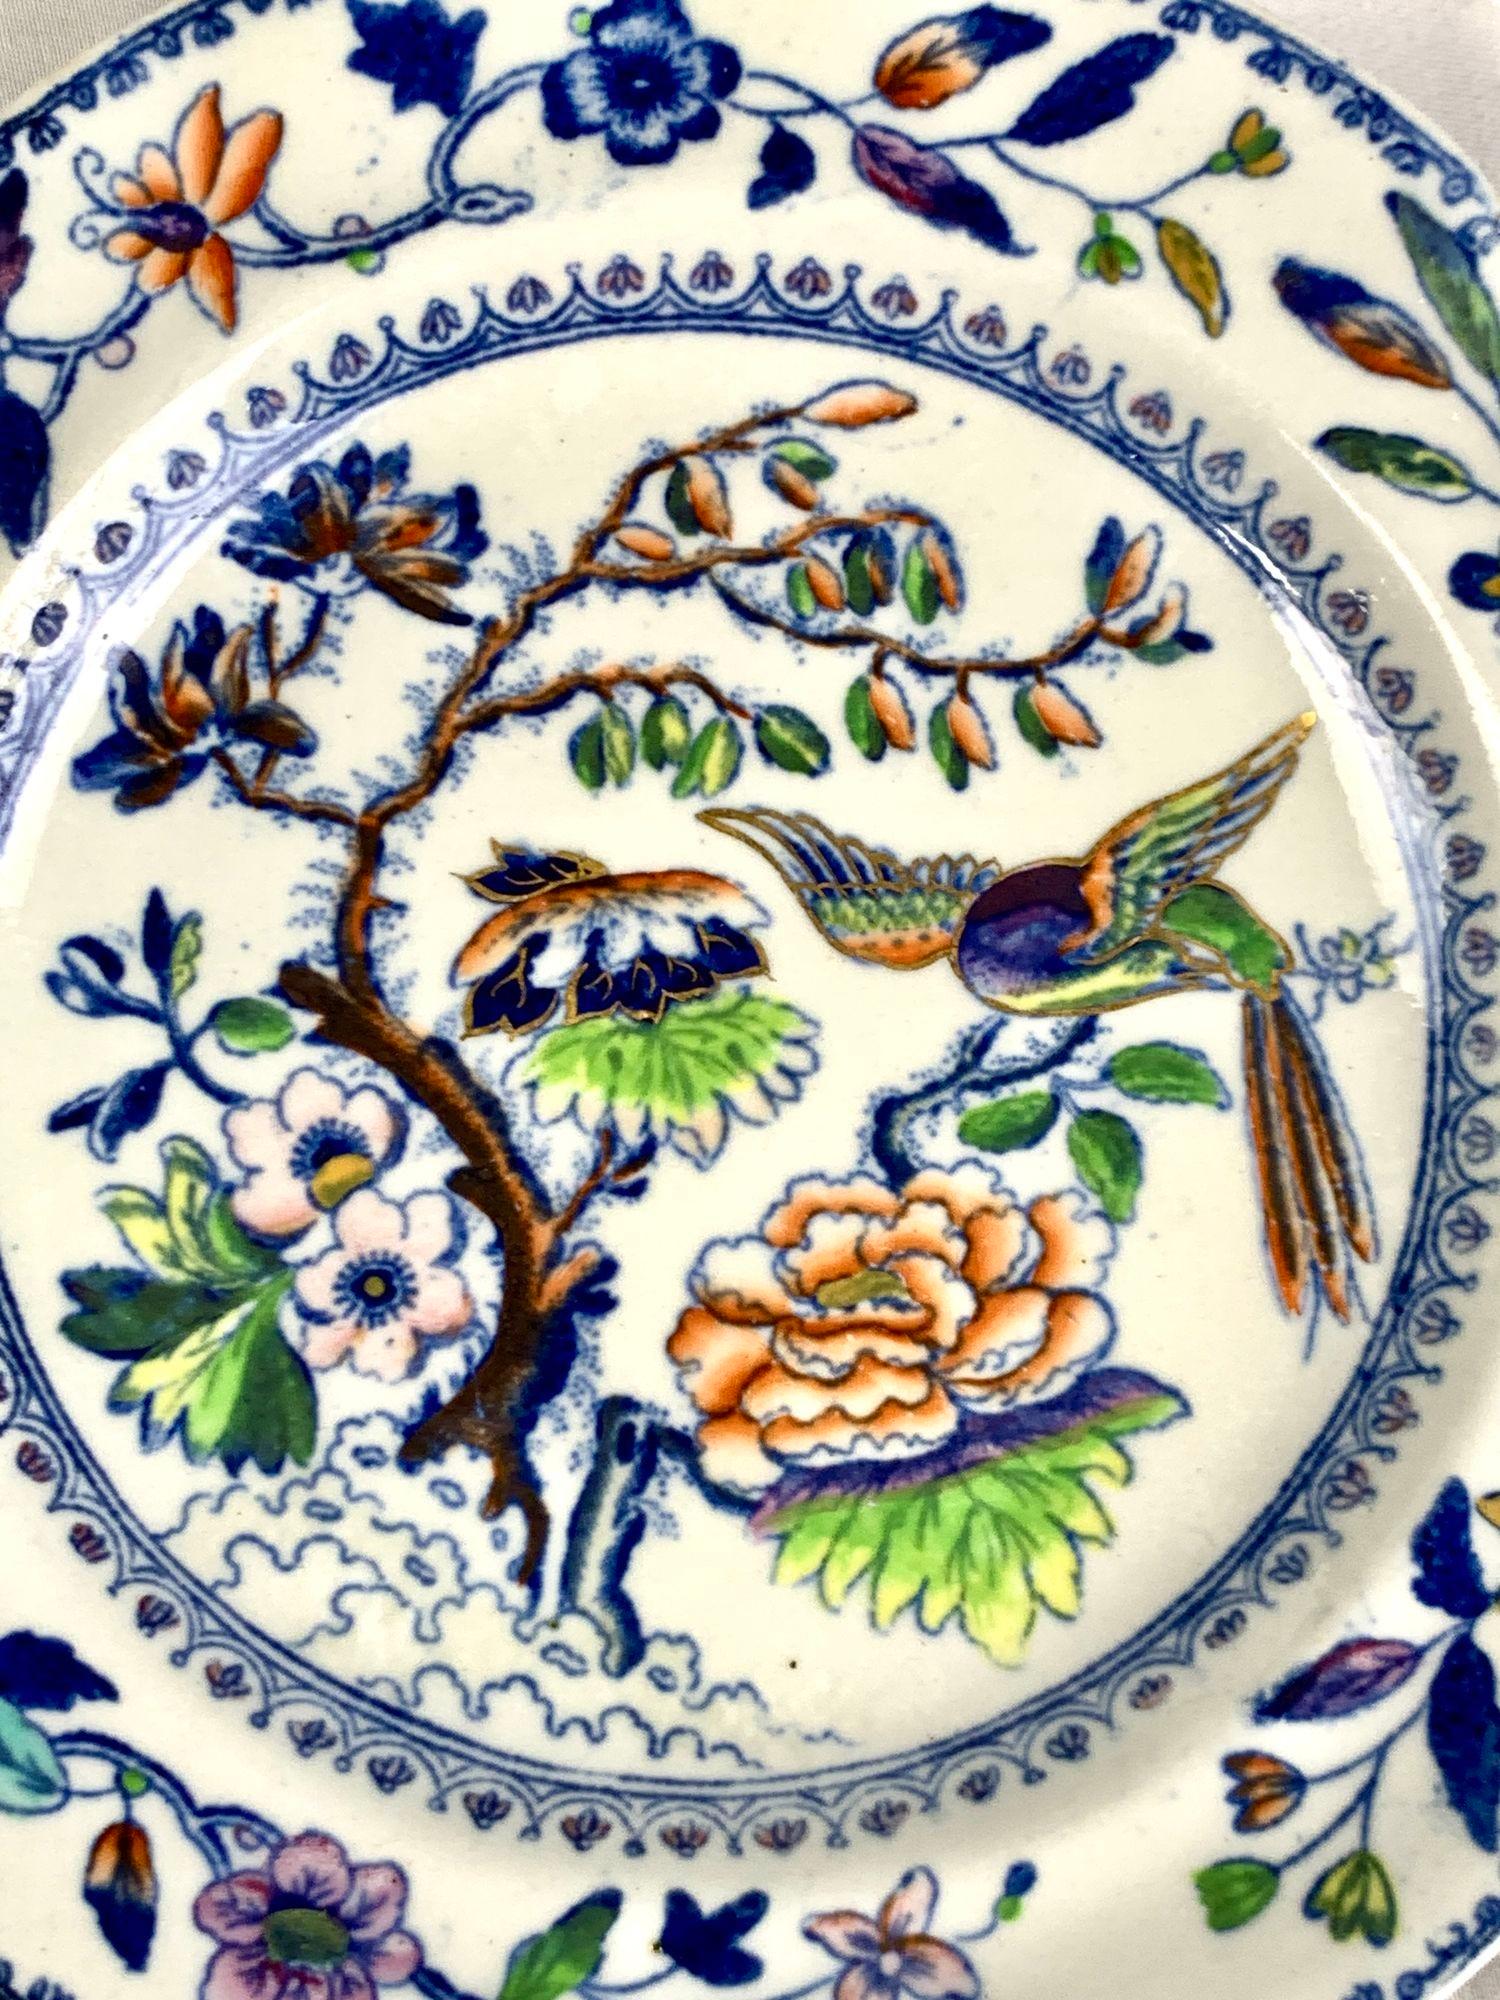 This set of eight Flying Bird dessert dishes has everything you want in a colorful pattern: a beautiful bird and flowers painted in rainbow colors.
The colors are an unexpected combination of purple, pink, yellow, orange, deep cobalt blue, and